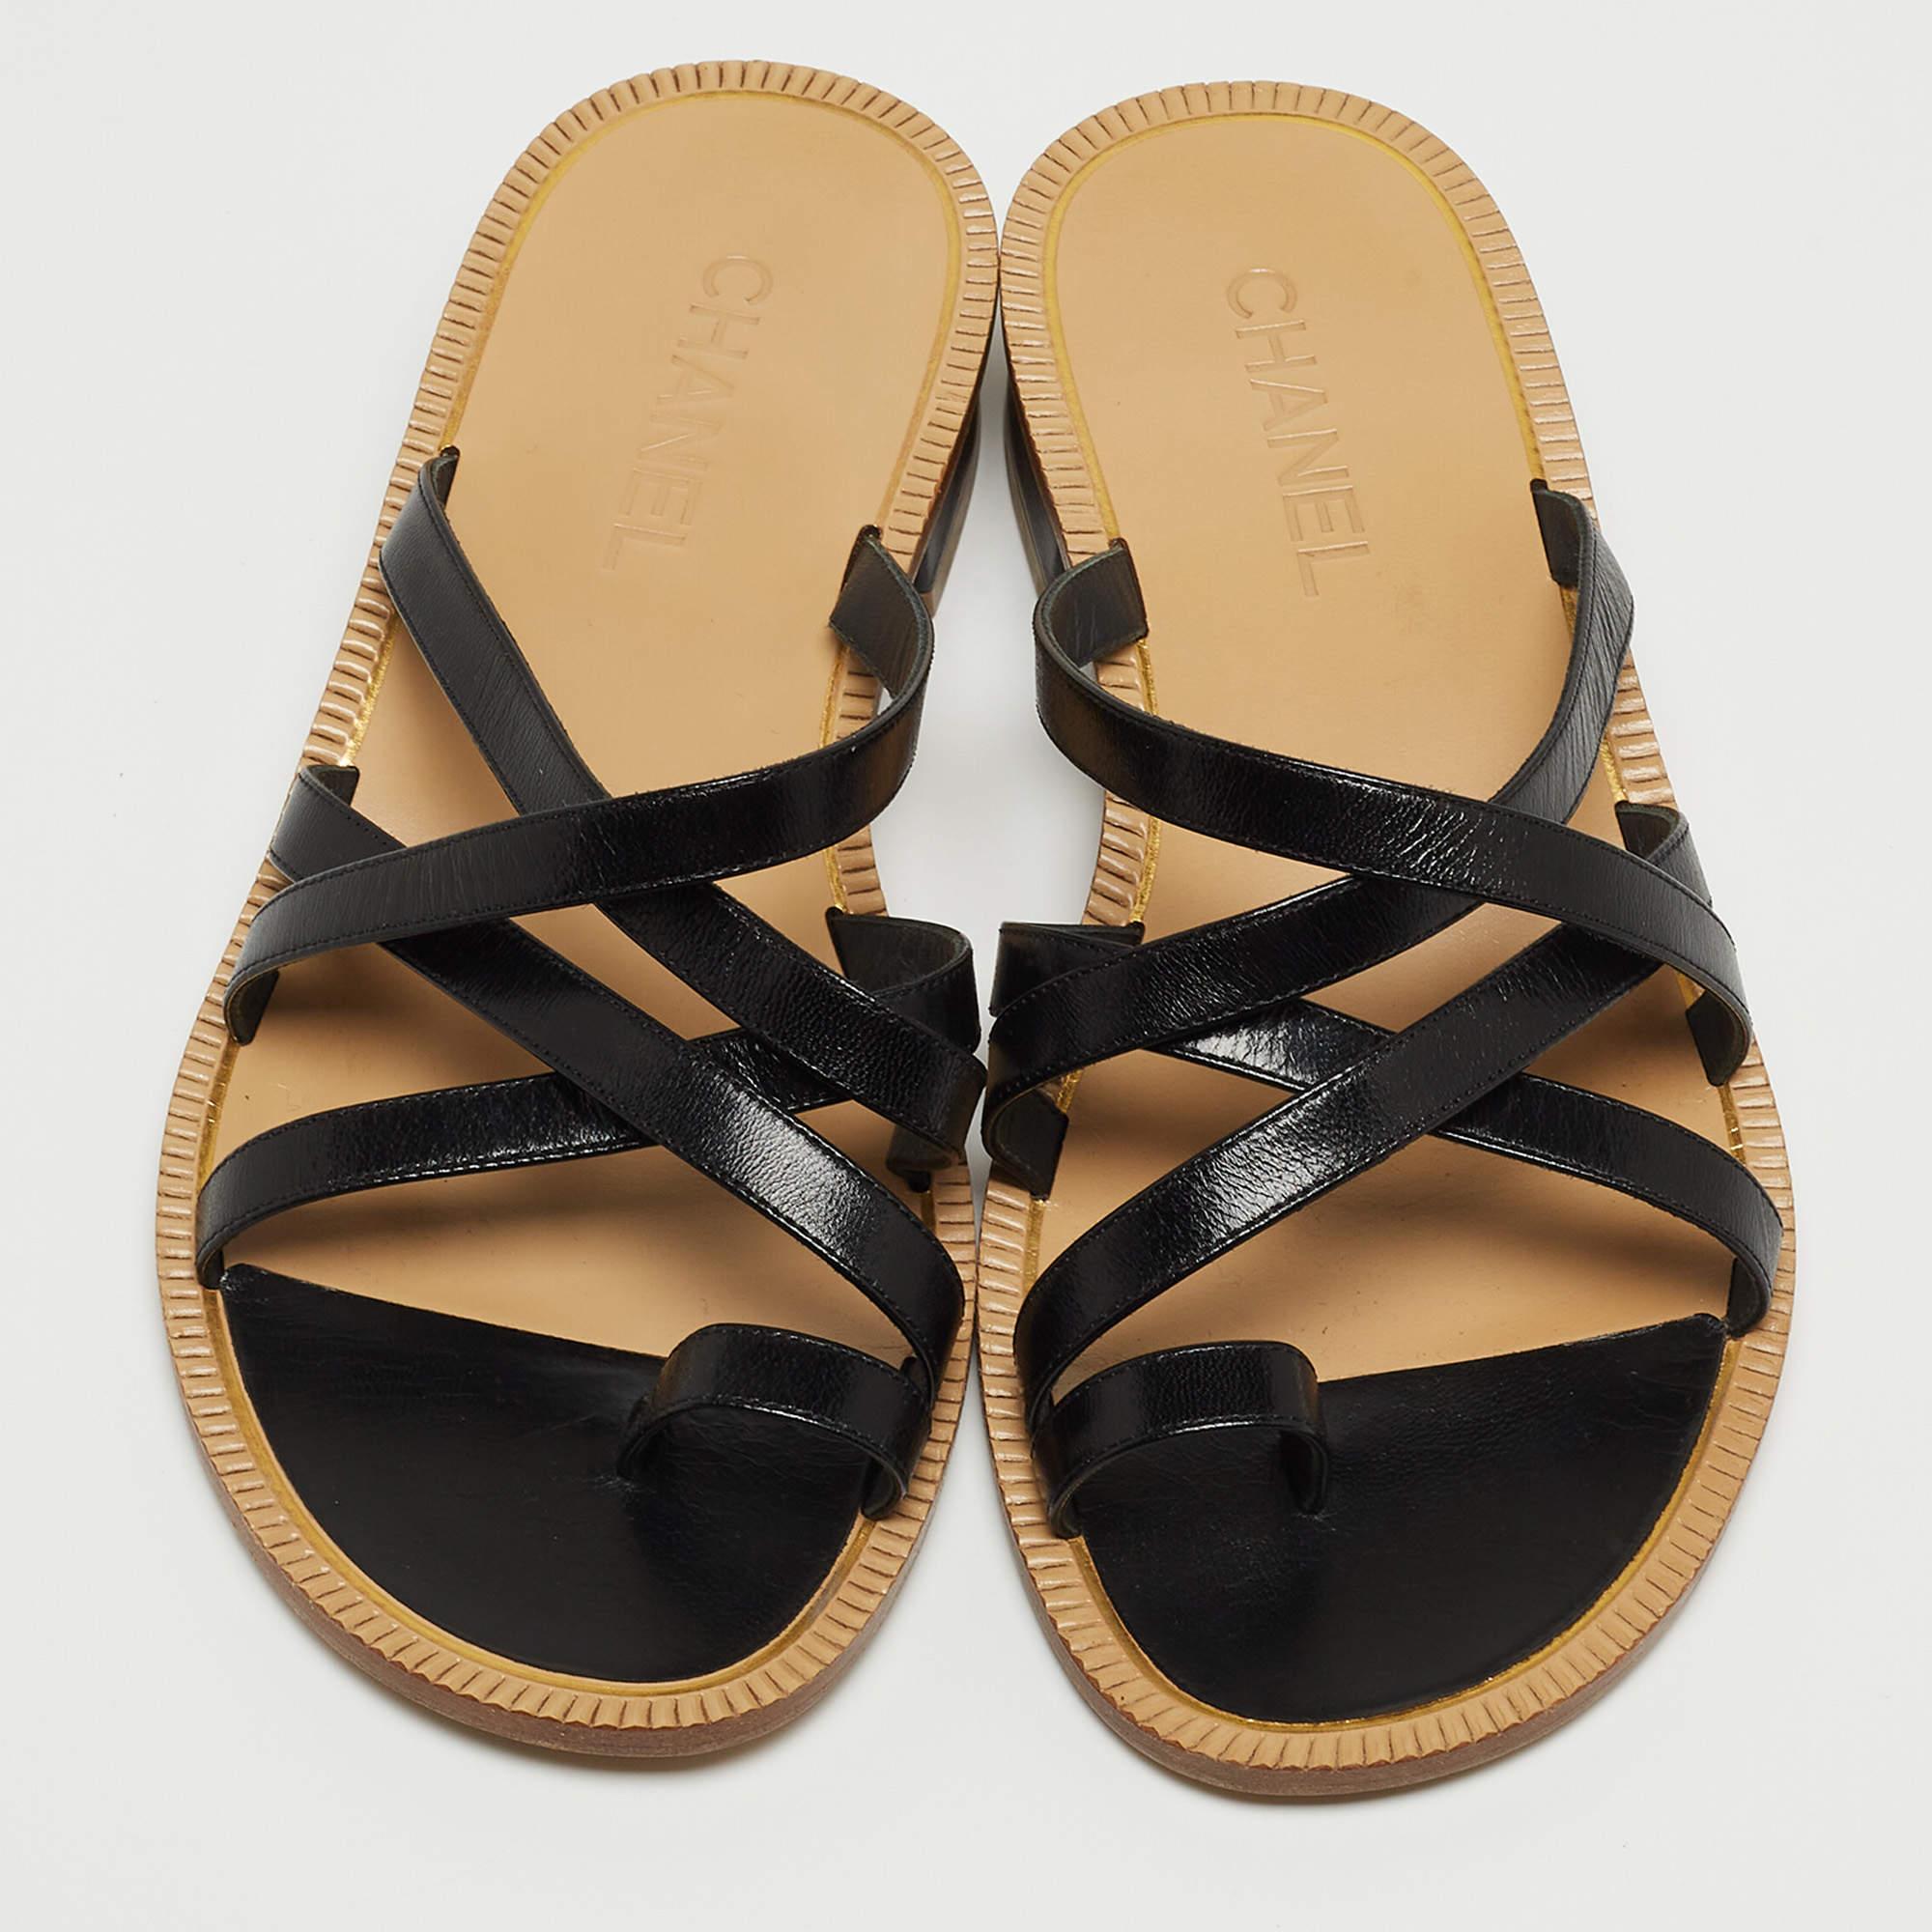 These sandals will frame your feet in an elegant manner. Crafted from quality materials, they display a classy design and comfortable insoles.

